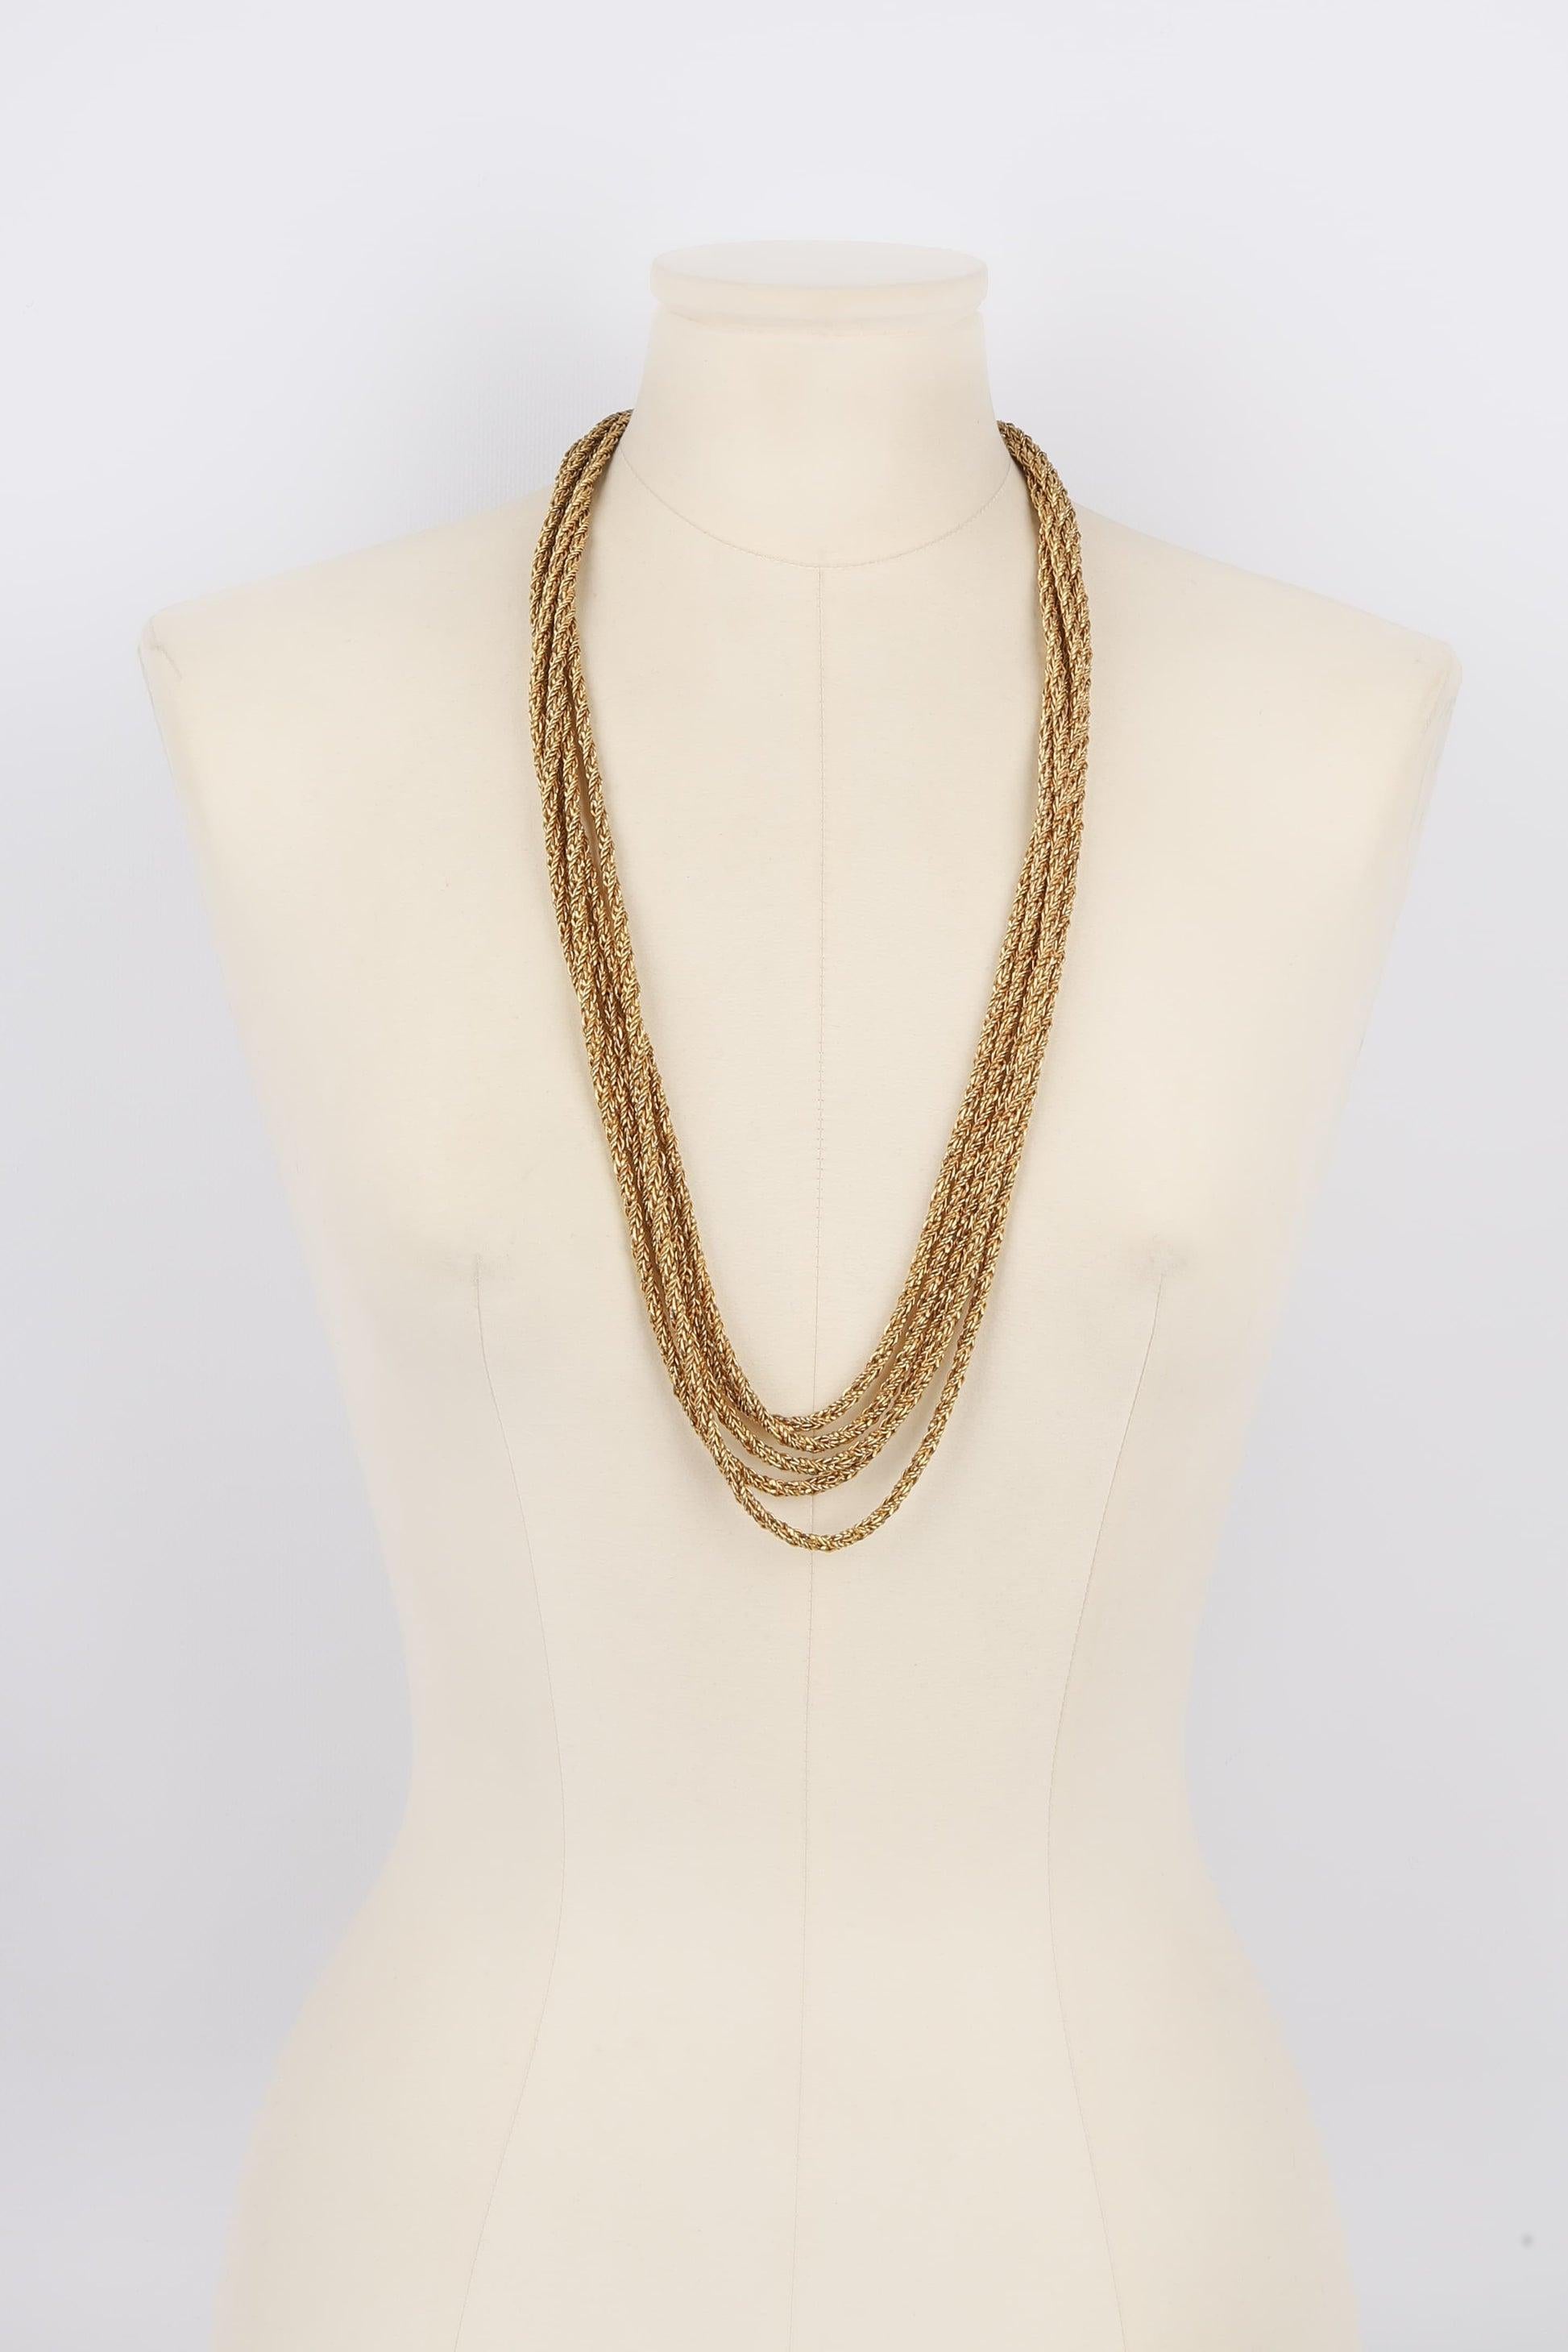 Dior -  (Made in Germany) Golden metal long chain necklace with a jewelry fastener ornamented with blue glass paste cabochons. 1969 Collection.

Additional information:
Condition: Very good condition
Dimensions: Length: 78 cm
Period: 20th